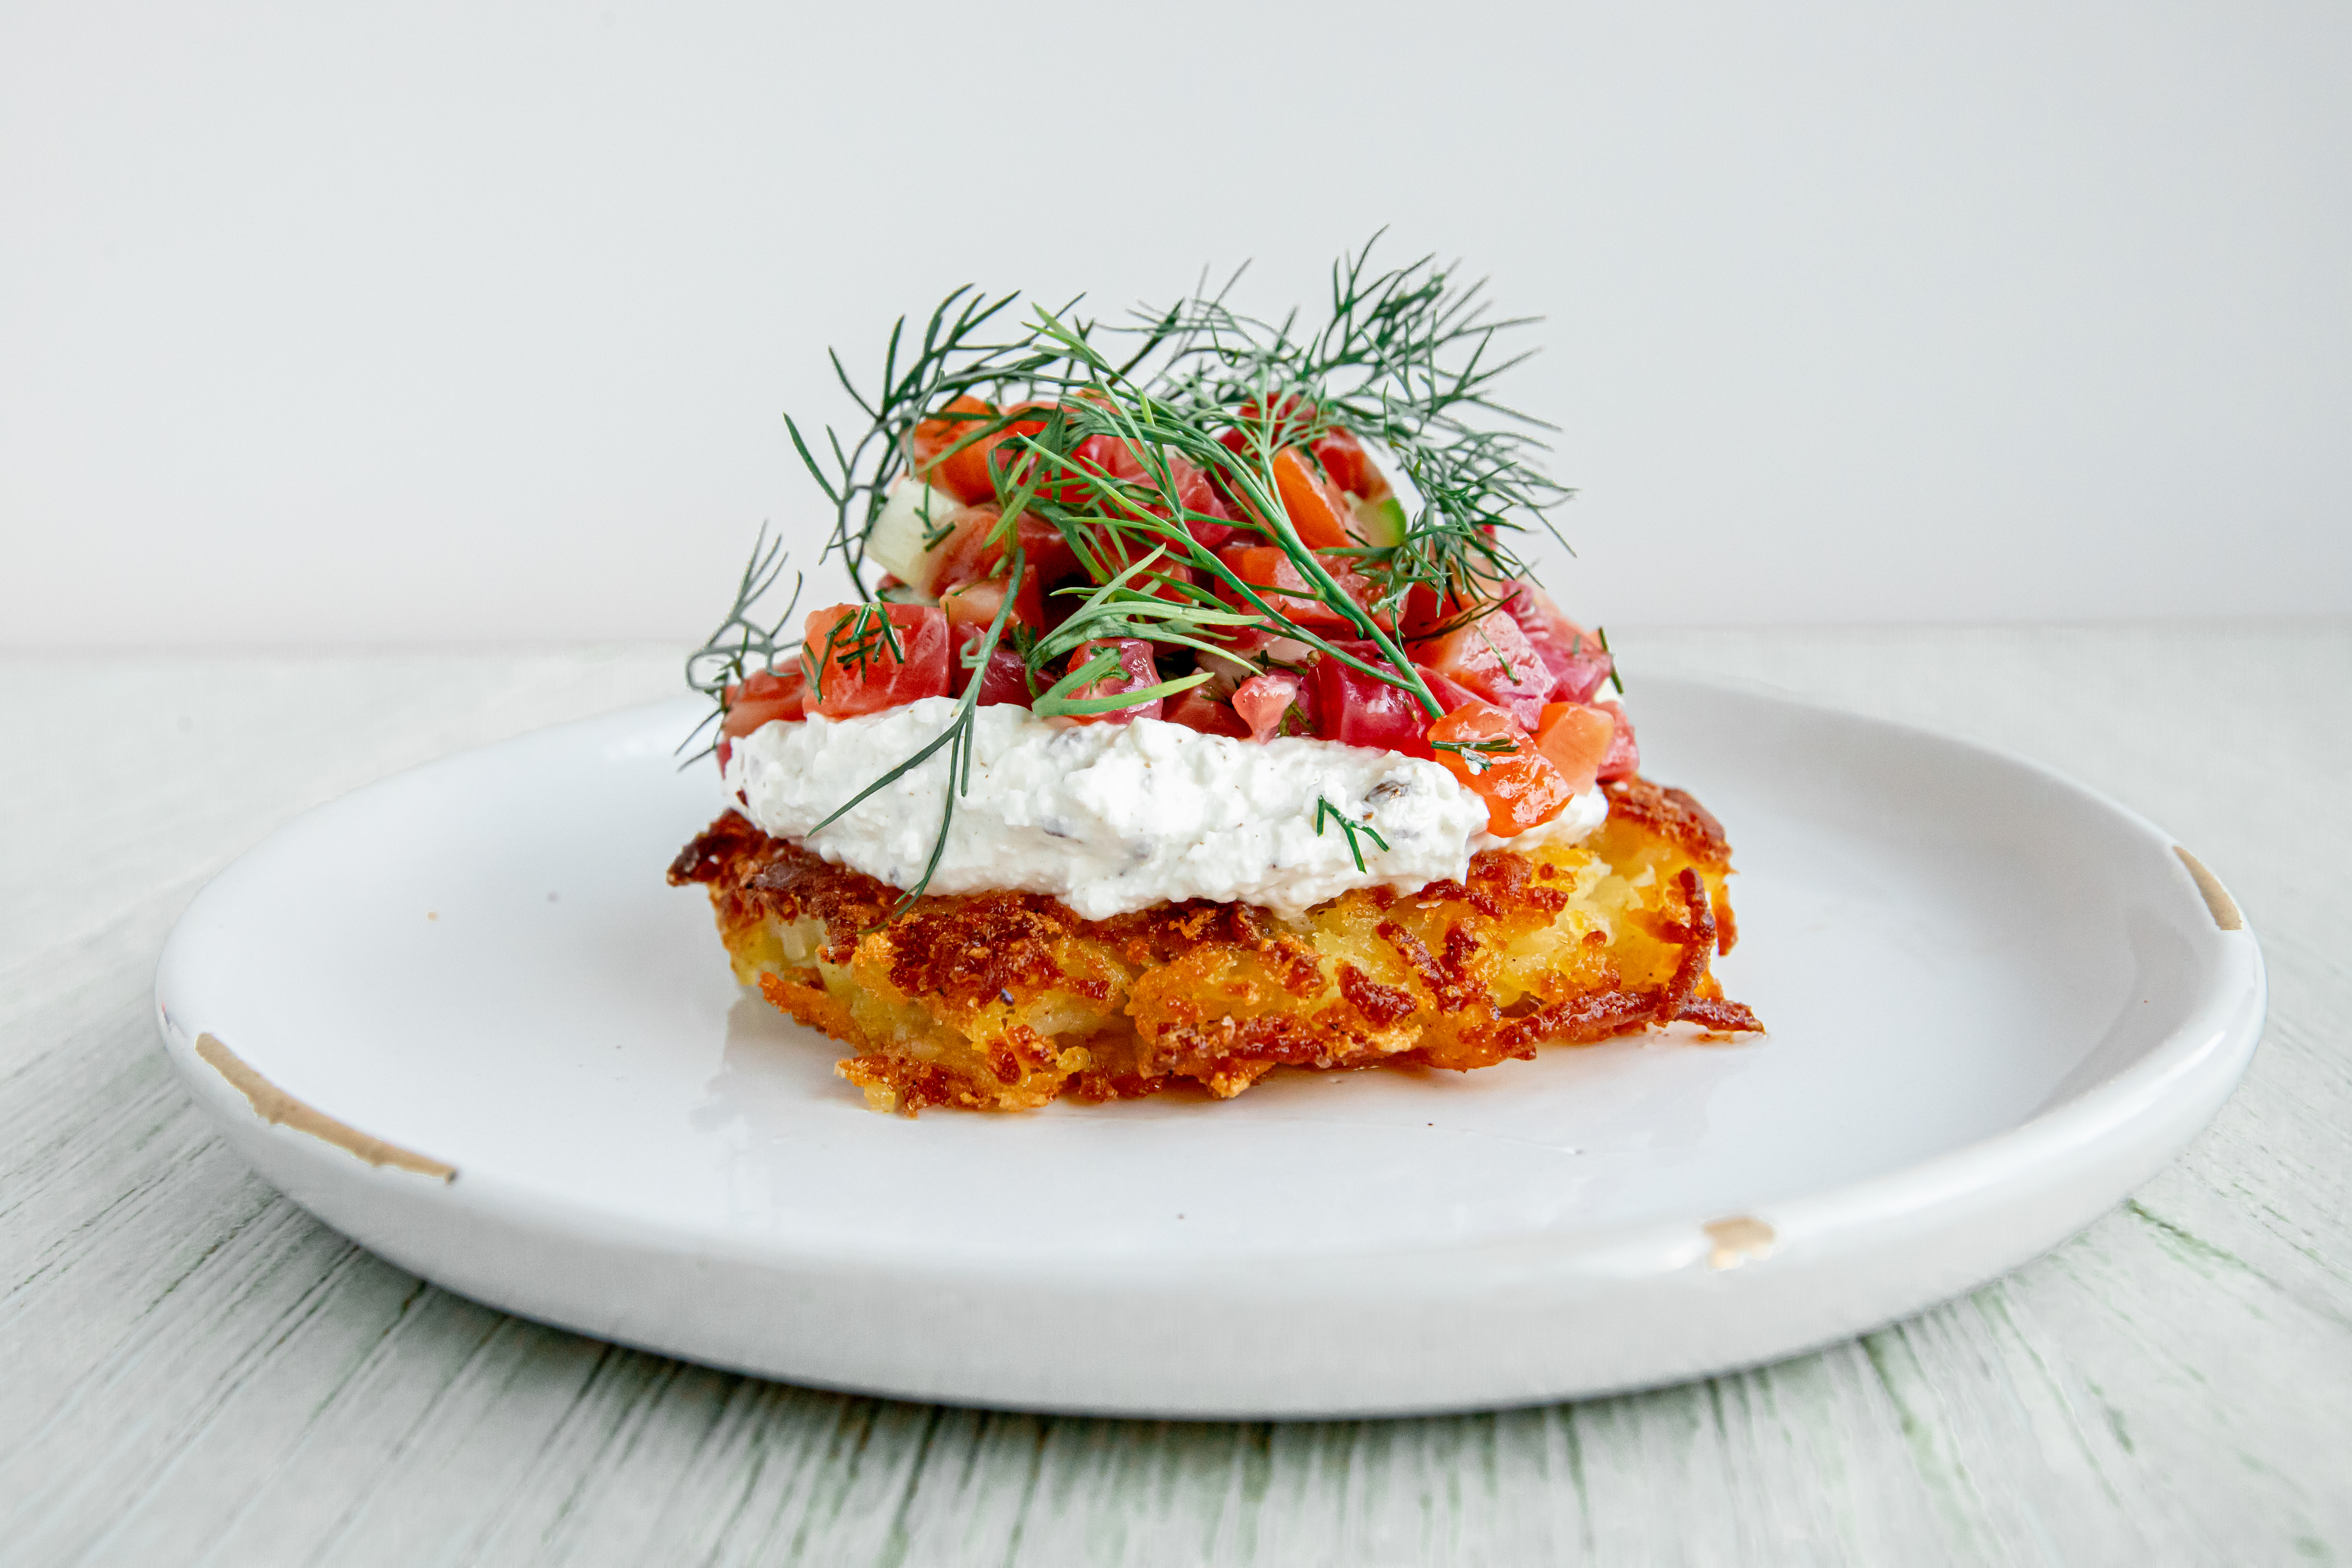 A cured arctic char rosti approximates lox and schmear with the addition of cucumber, a lemon dill vinaigrette, and a caraway quark that Anderson compares to a German ricotta.